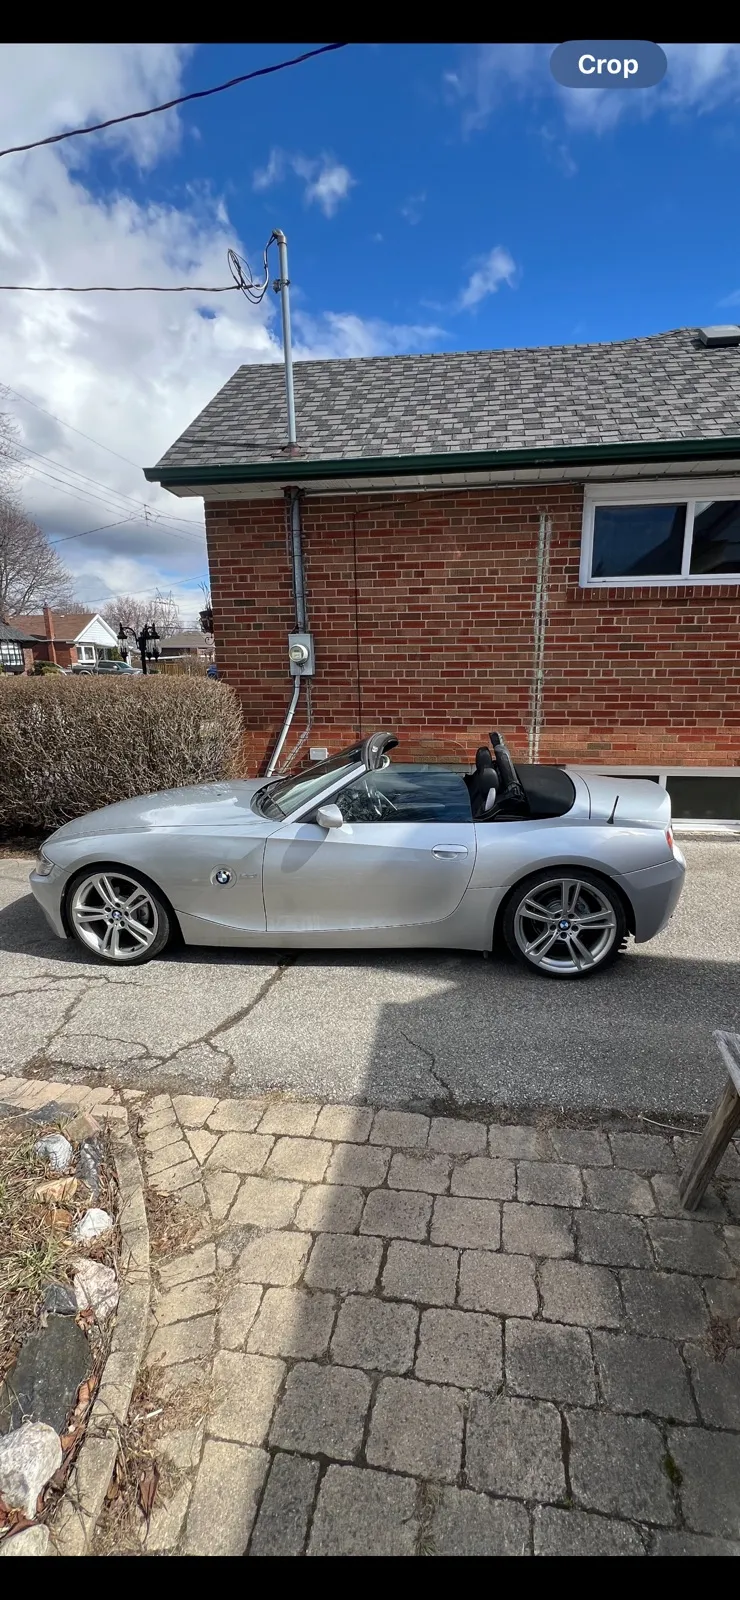 Bmw z4 right hand drive. Collectable car only 40km on it